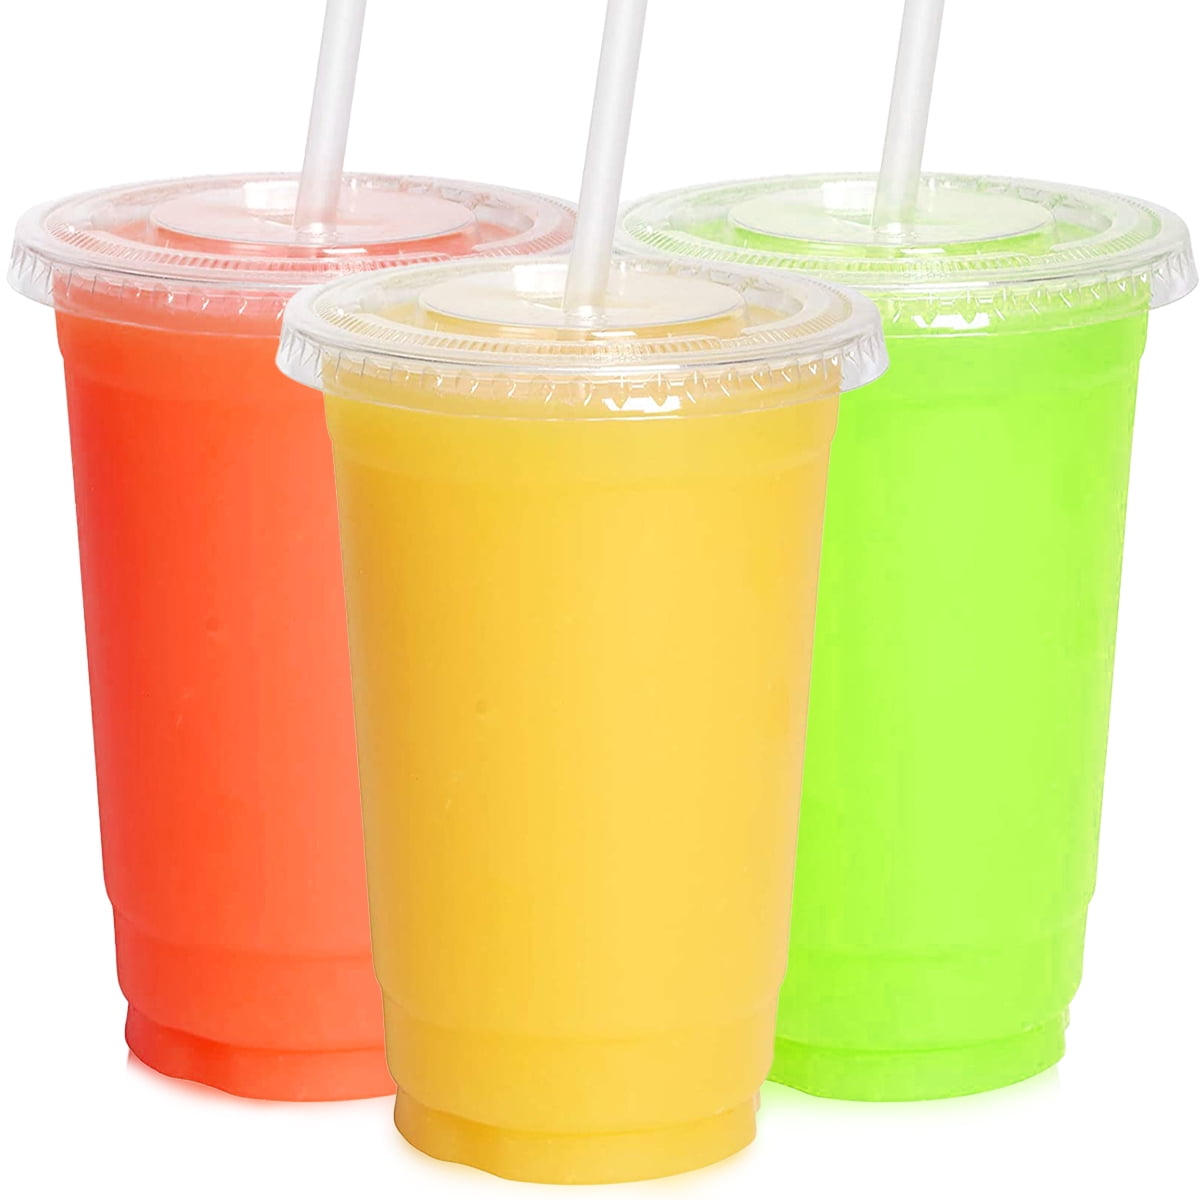 Ice Crème Cups |Durable and Strong Great for Smoothies Milkshakes and Thick Shakes Frenterprises 100 Strong Plastic Smoothie Cups – 10 Oz Milkshake Cups with Dome Lid 